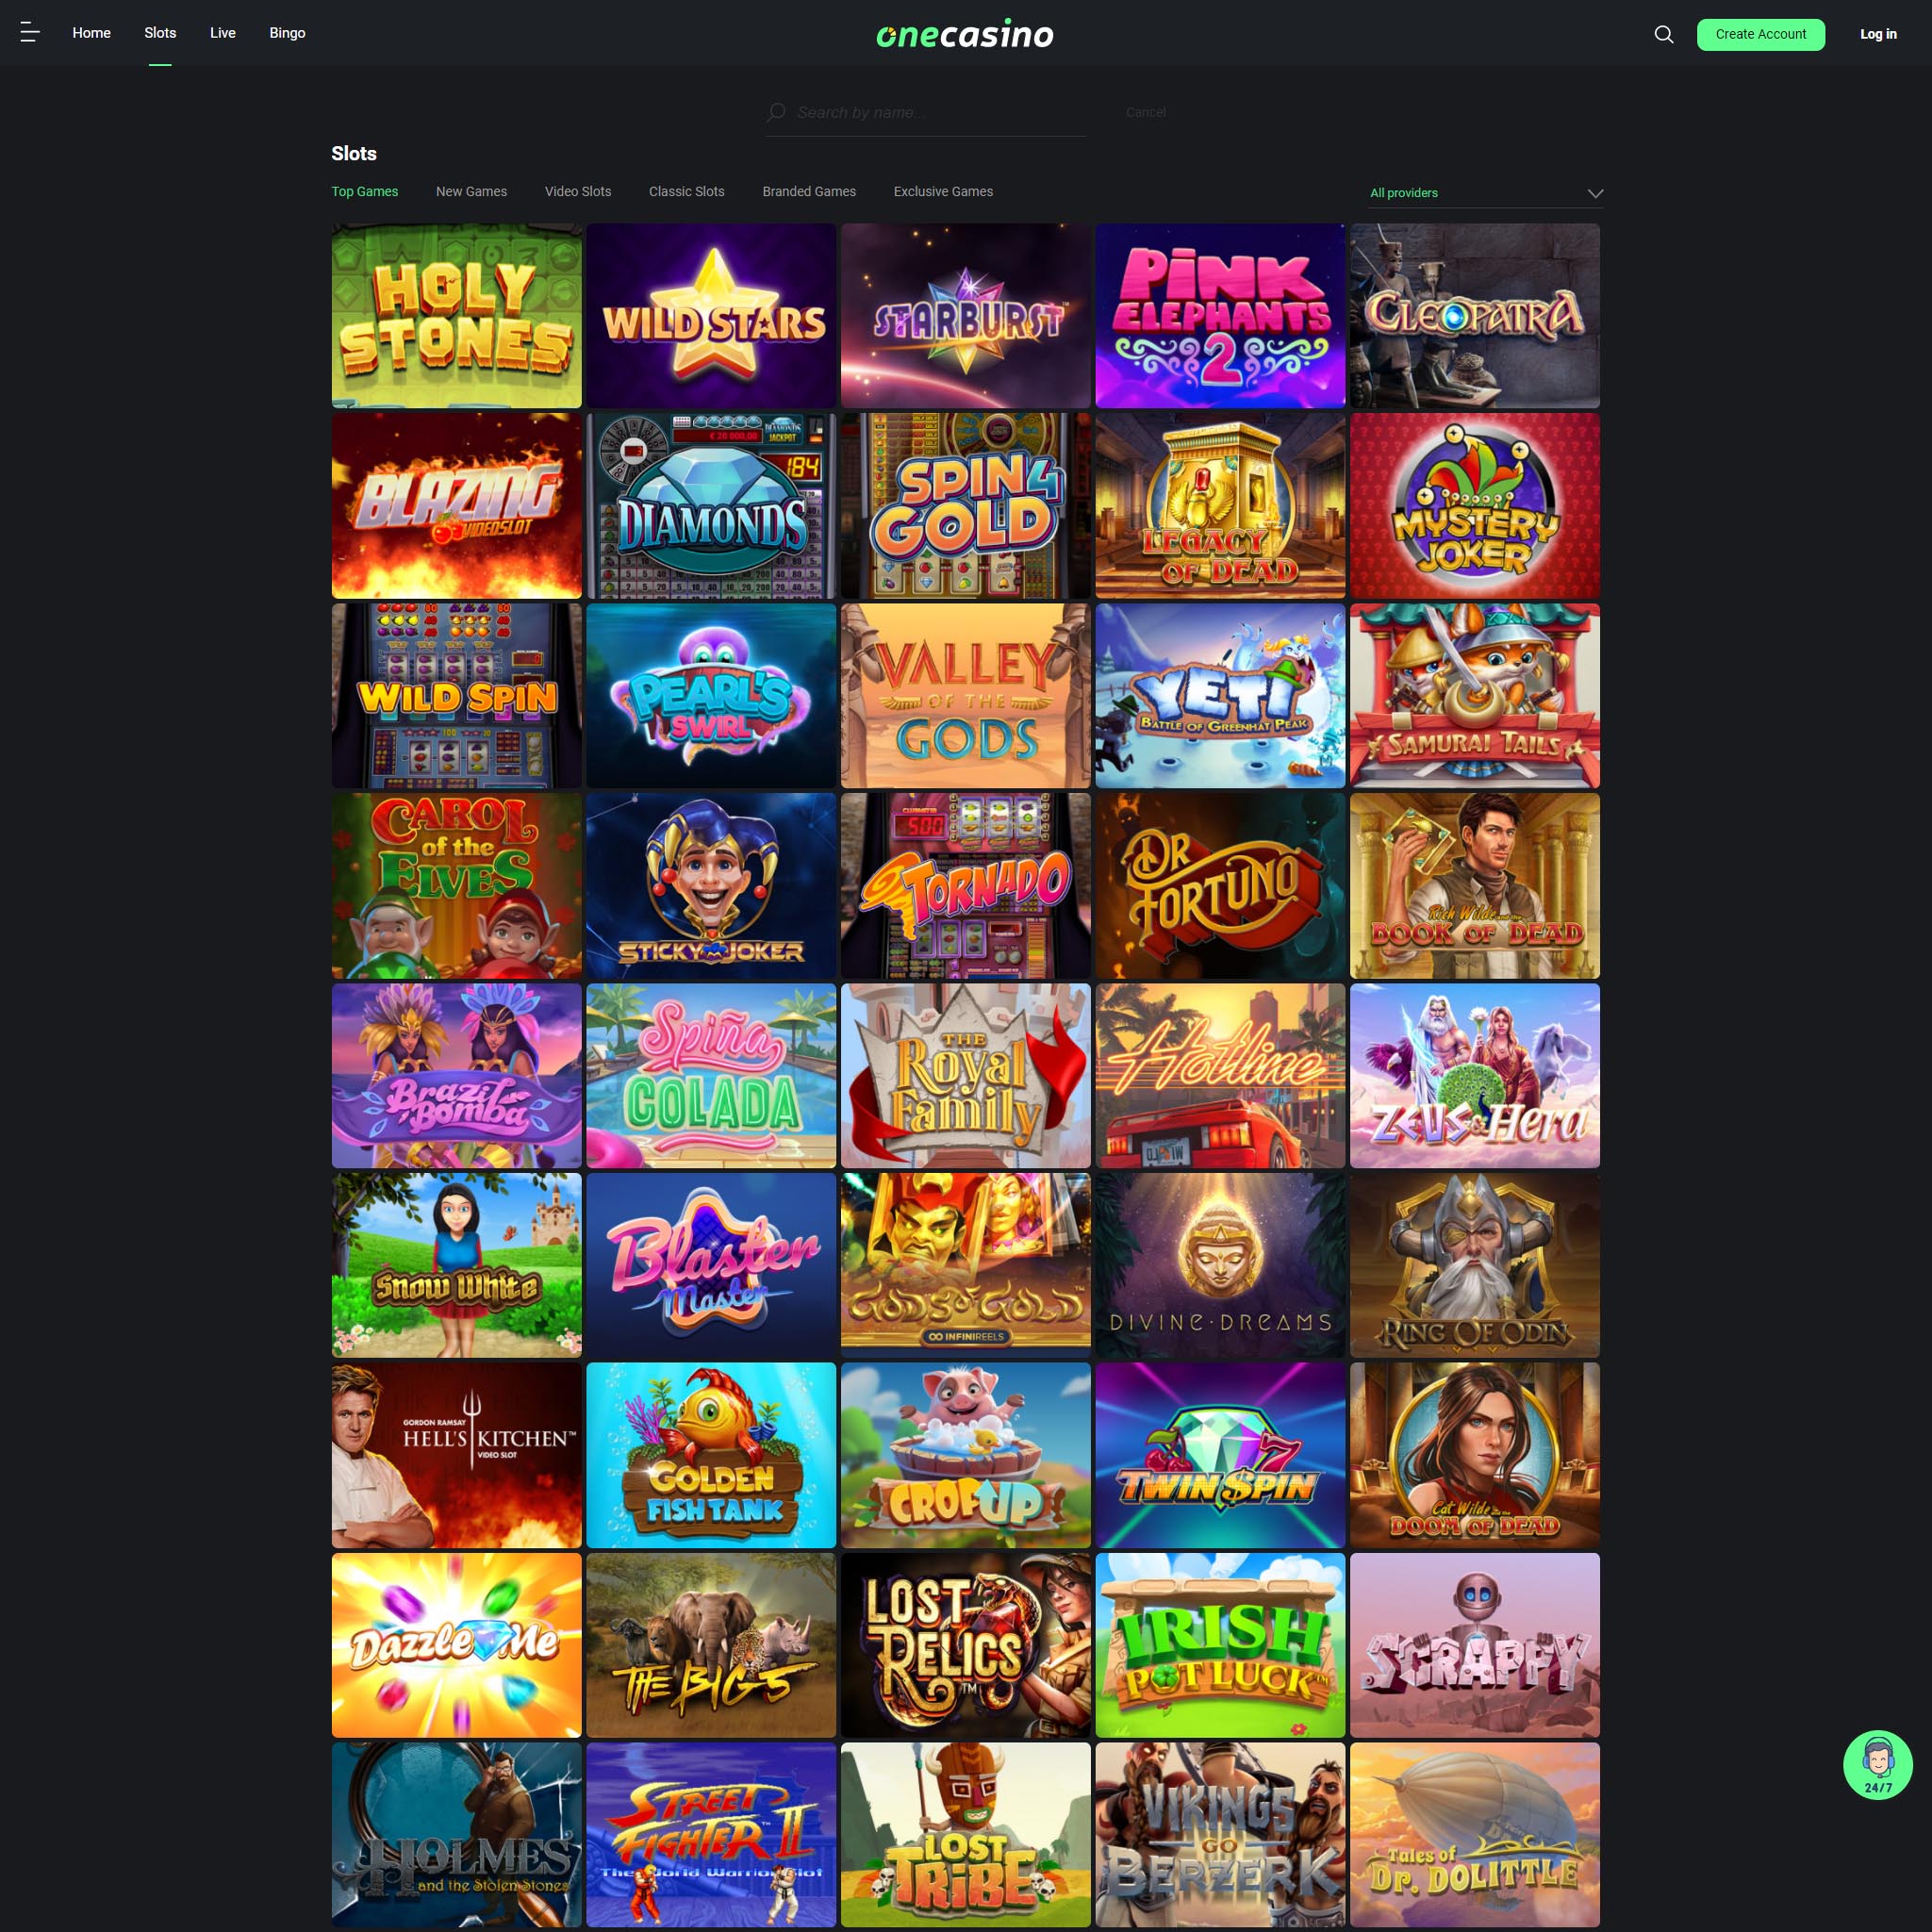 One Casino full games catalogue